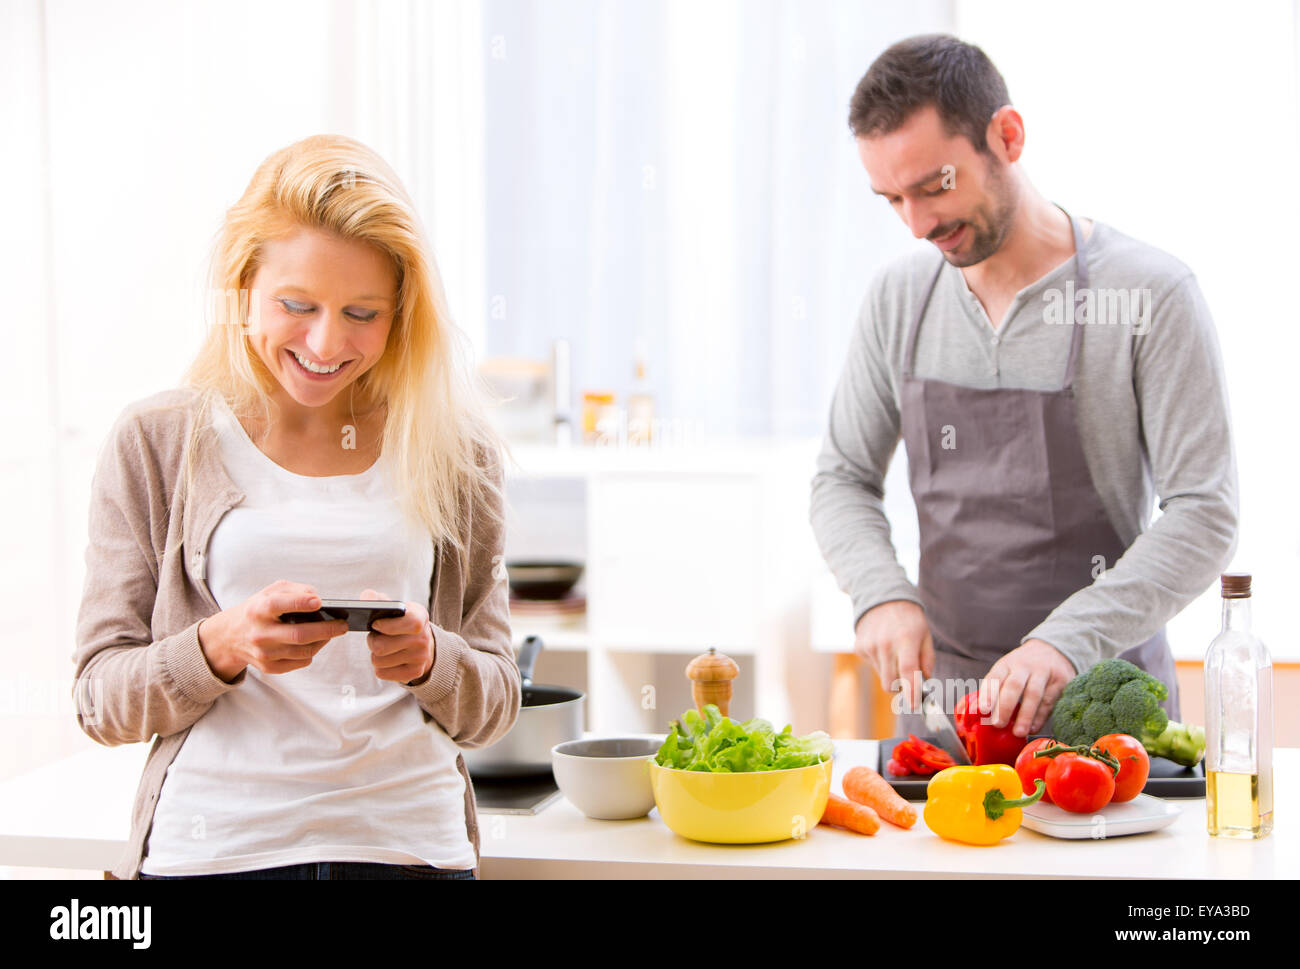 View of a Young attractive woman writing text in kitchen Stock Photo